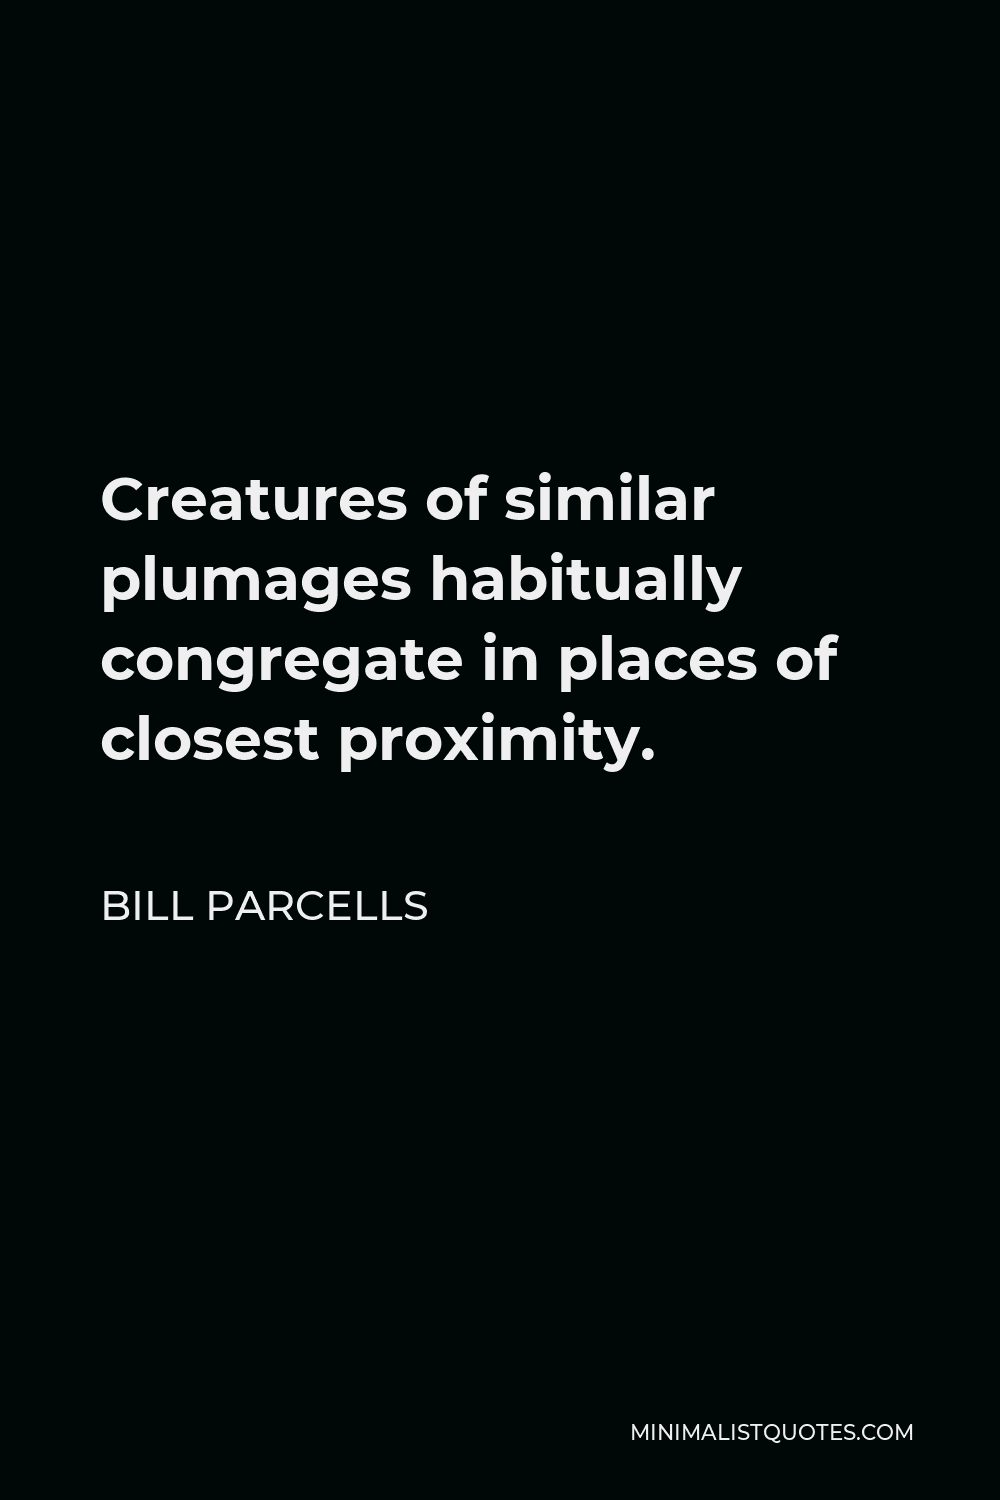 Bill Parcells Quote - Creatures of similar plumages habitually congregate in places of closest proximity.